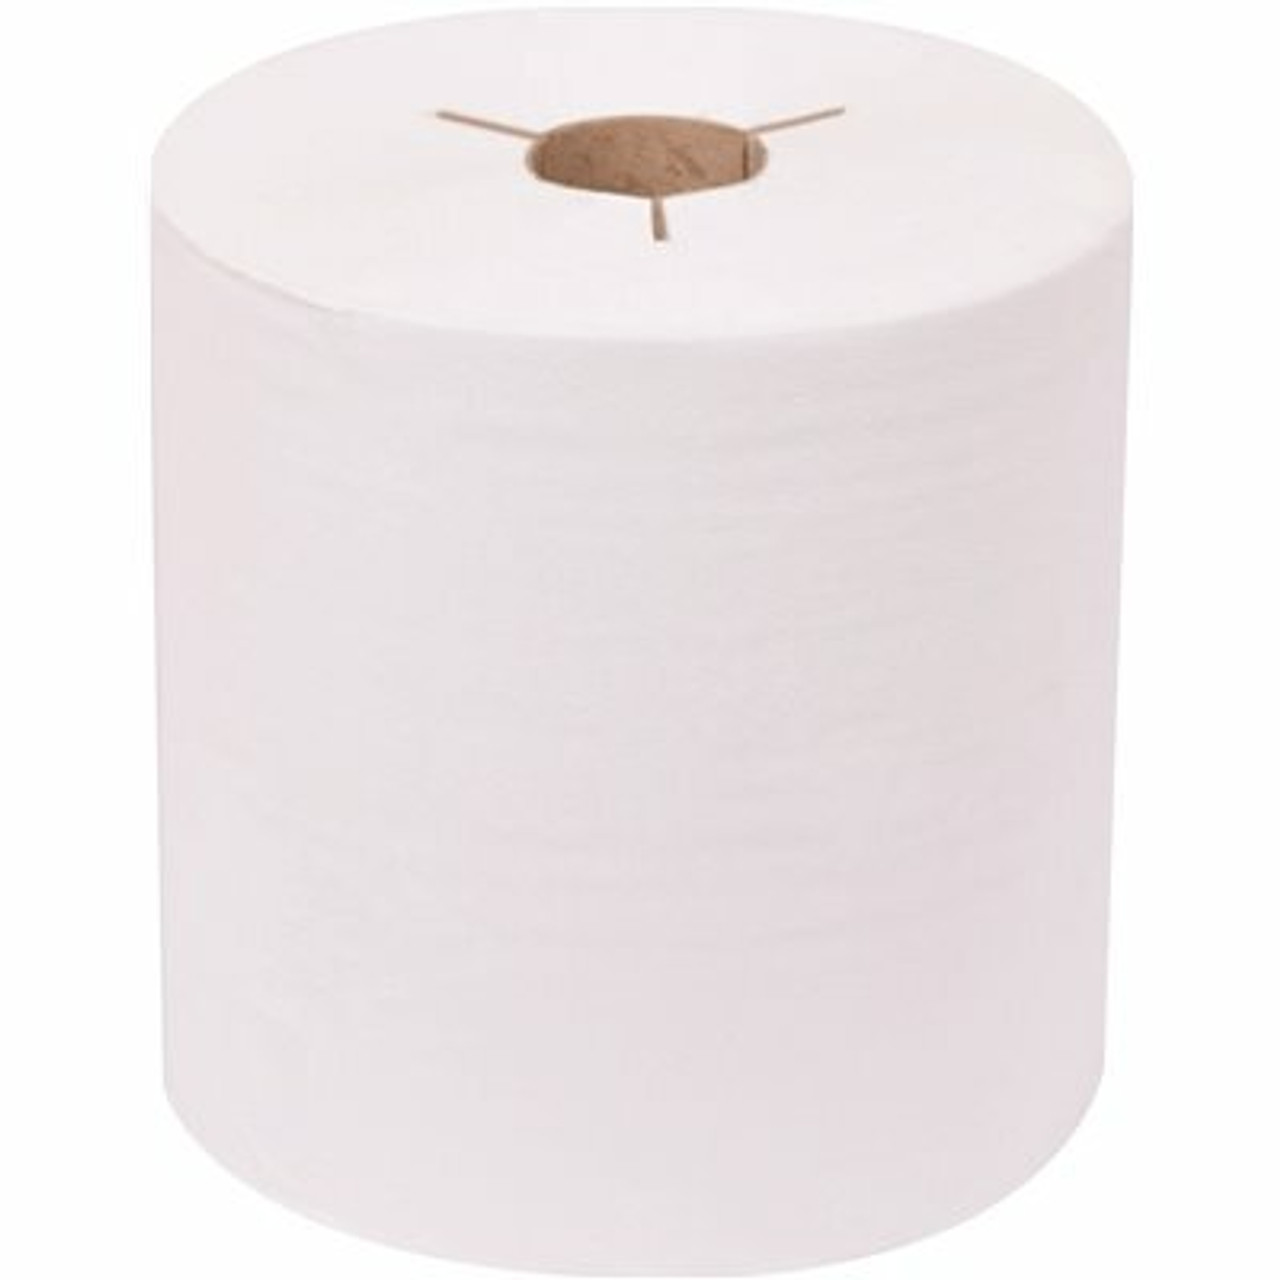 Renown 8 In. White Advanced Controlled Hardwound Paper Towels (800 Ft. Per Roll, 6-Rolls Per Case)